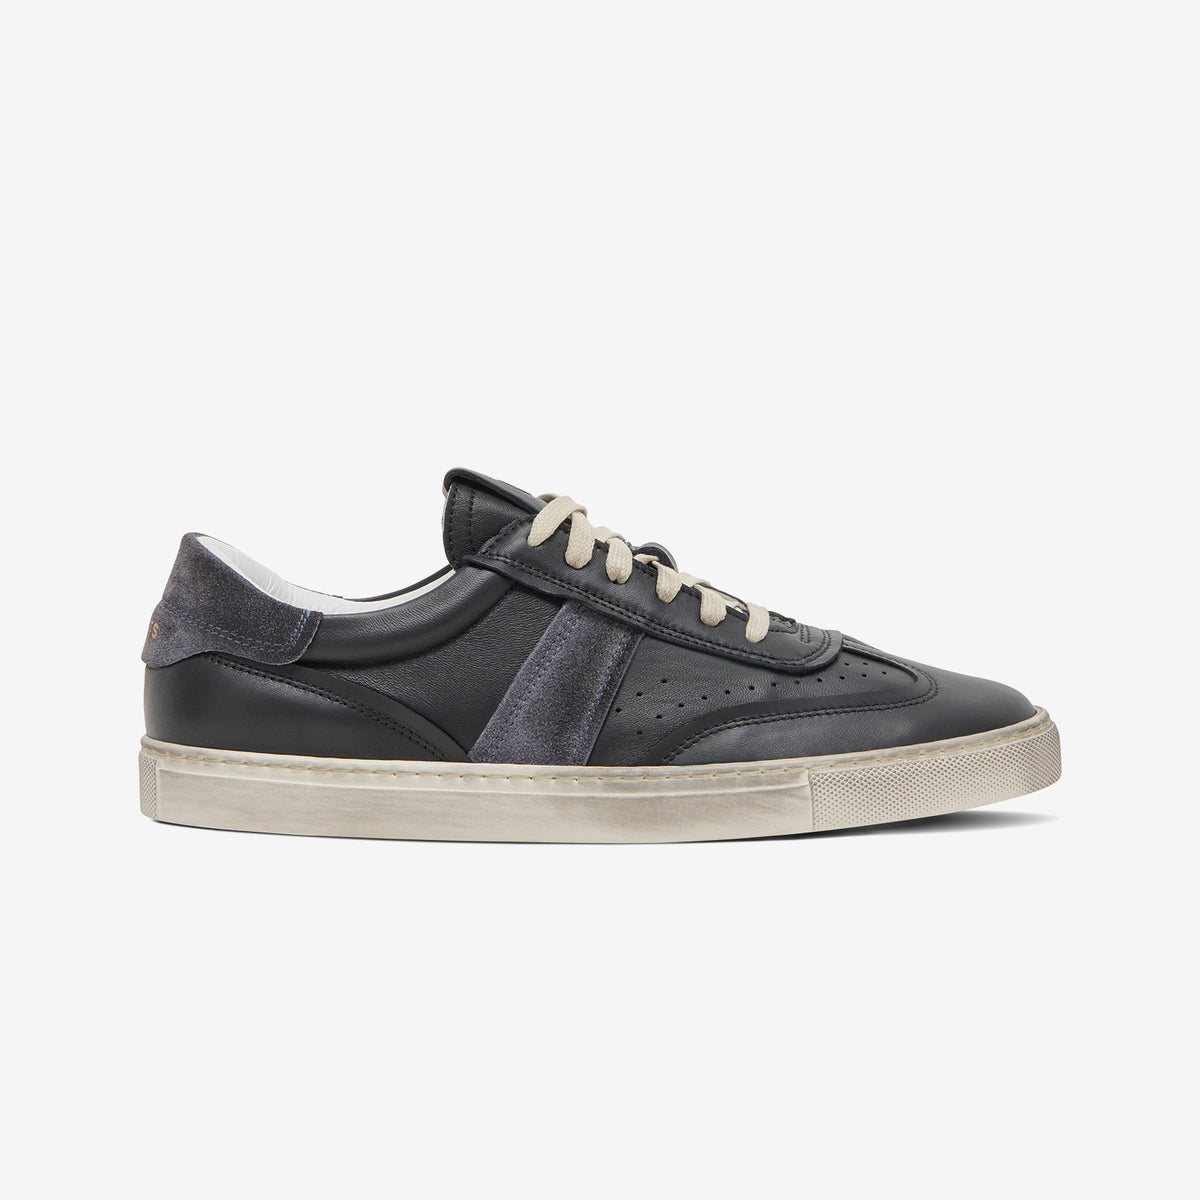 Greats - The Charlie Distressed - Black/Grey - Men's Shoe – GREATS